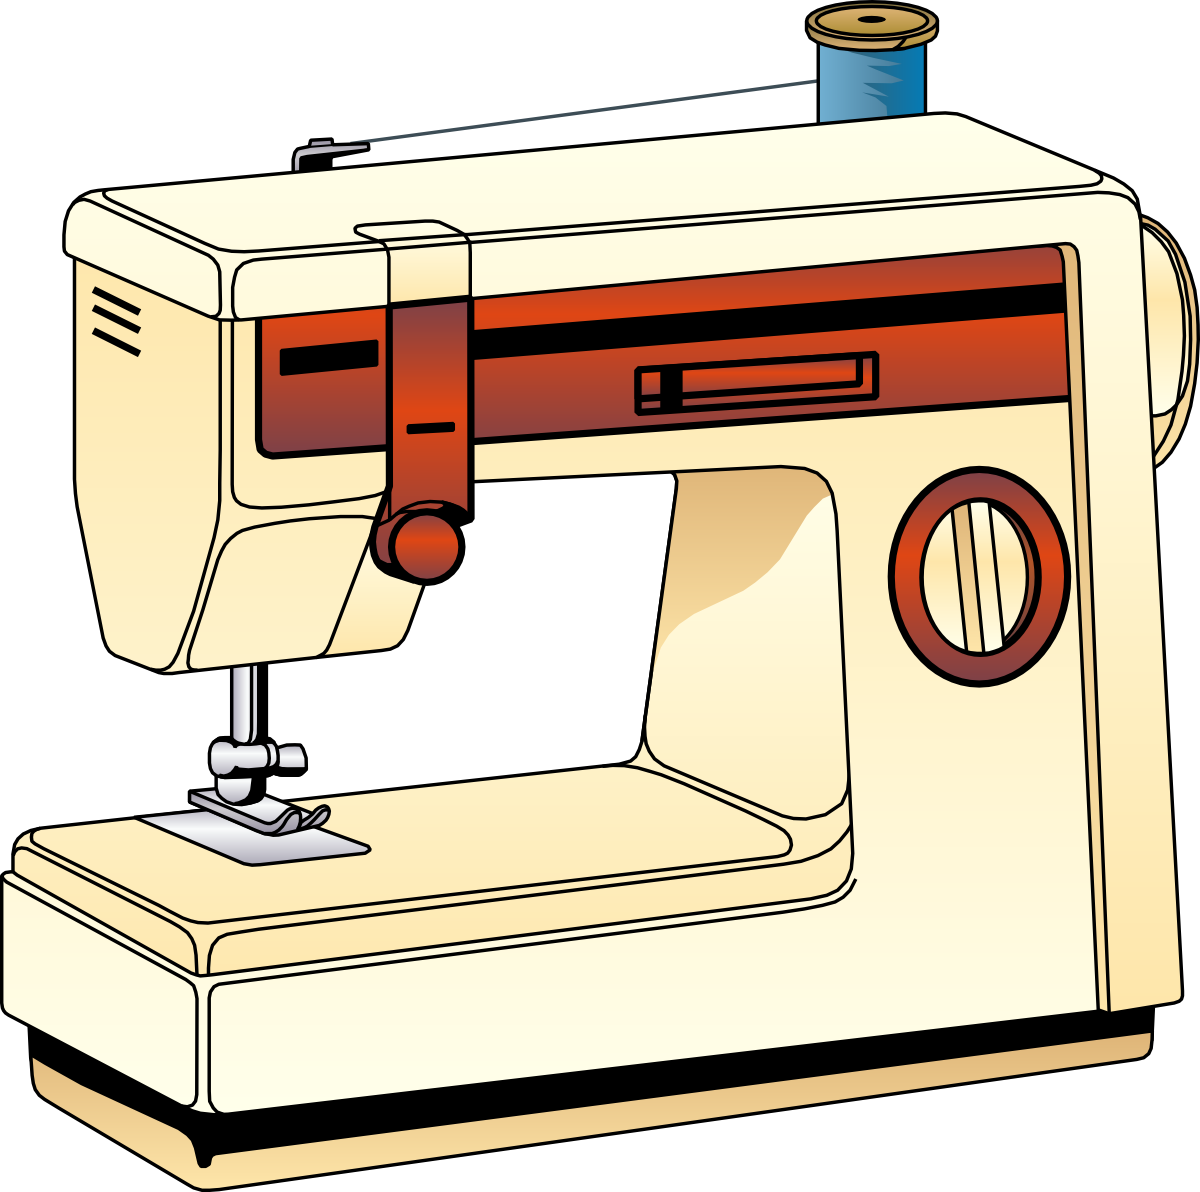 Sewing machine 0 images about sewing clip art on 2